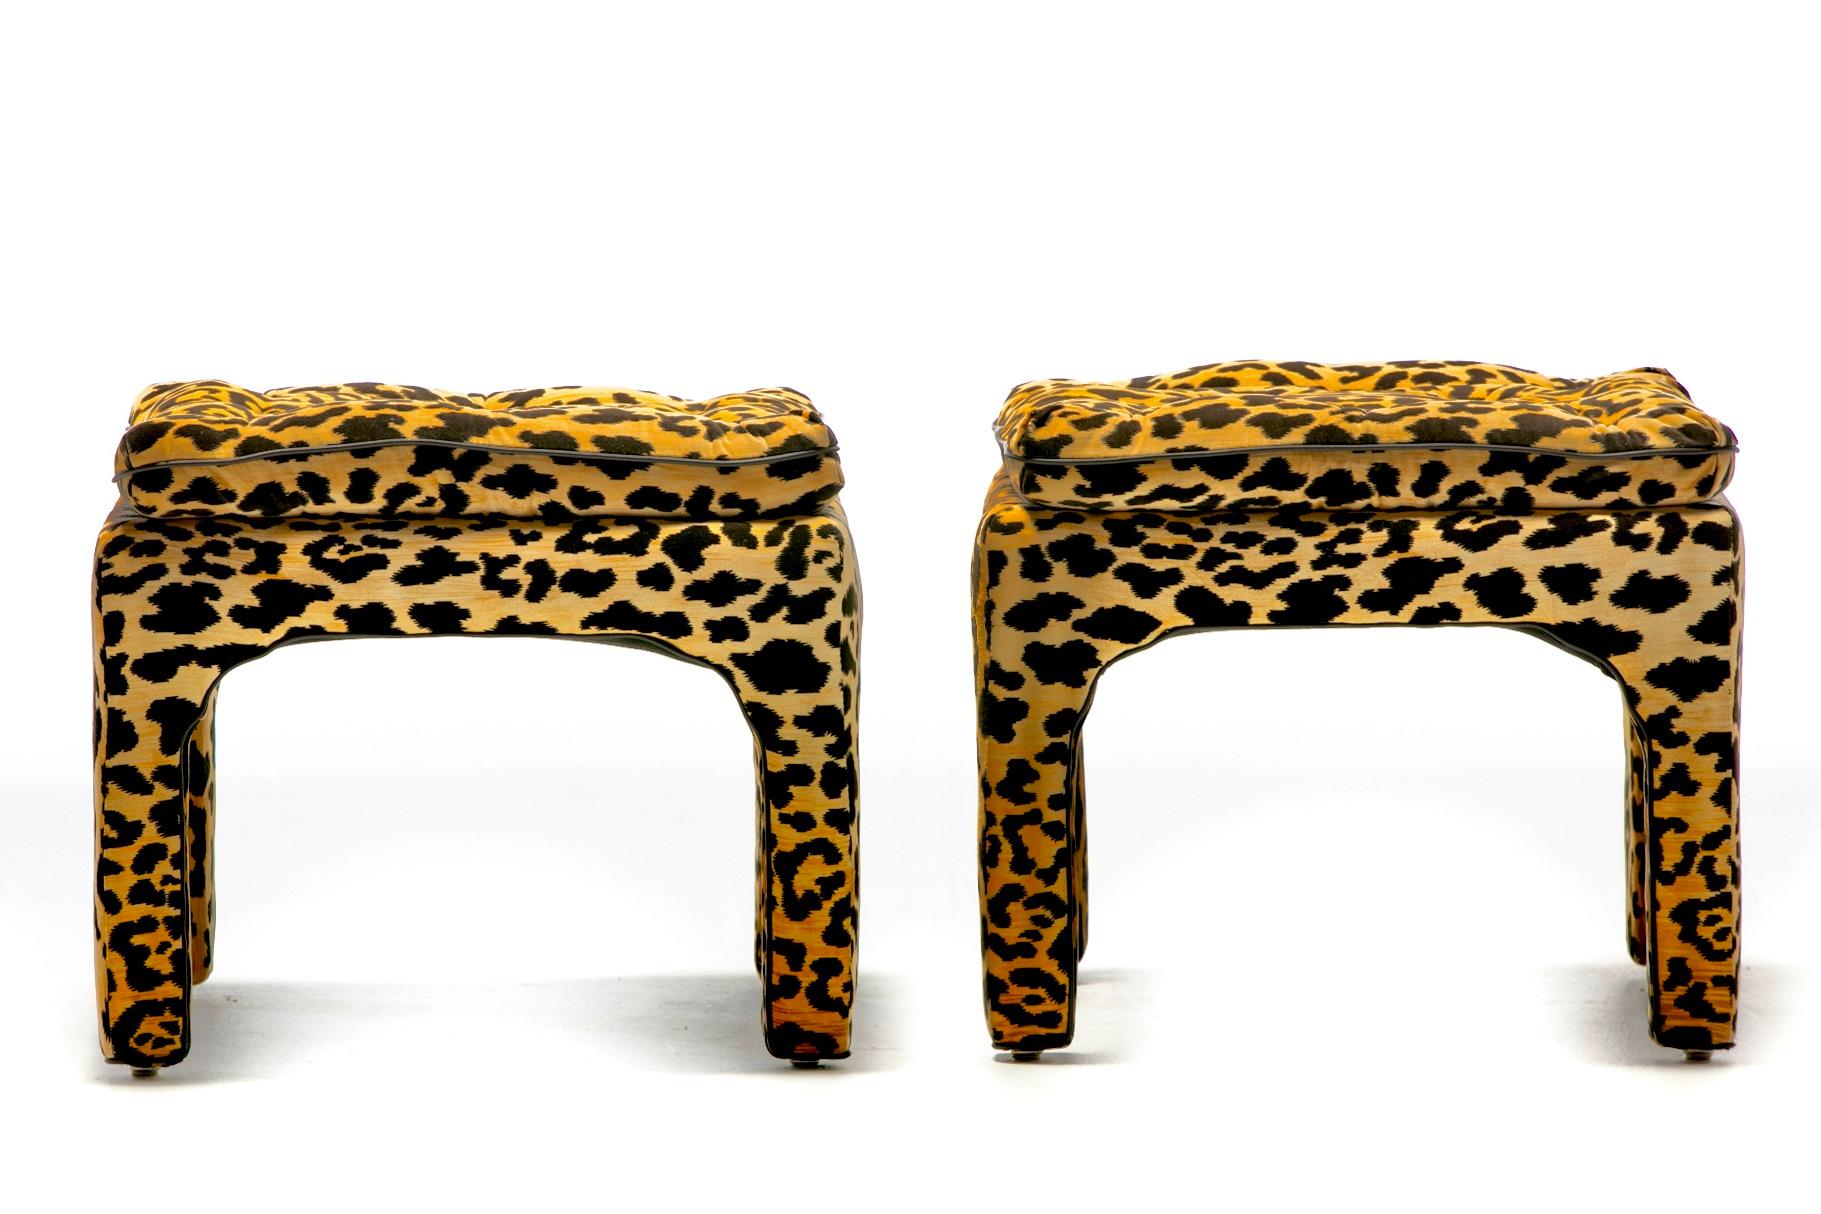 Super sexy pair of 1970s Billy Baldwin style ottomans or stools fully restored with new cushioning and upholstered in sultry leopard velvet with black leather piping detail. Chic. Sexy. Lux look and vibe. Tufted leopard velvet top cushion is